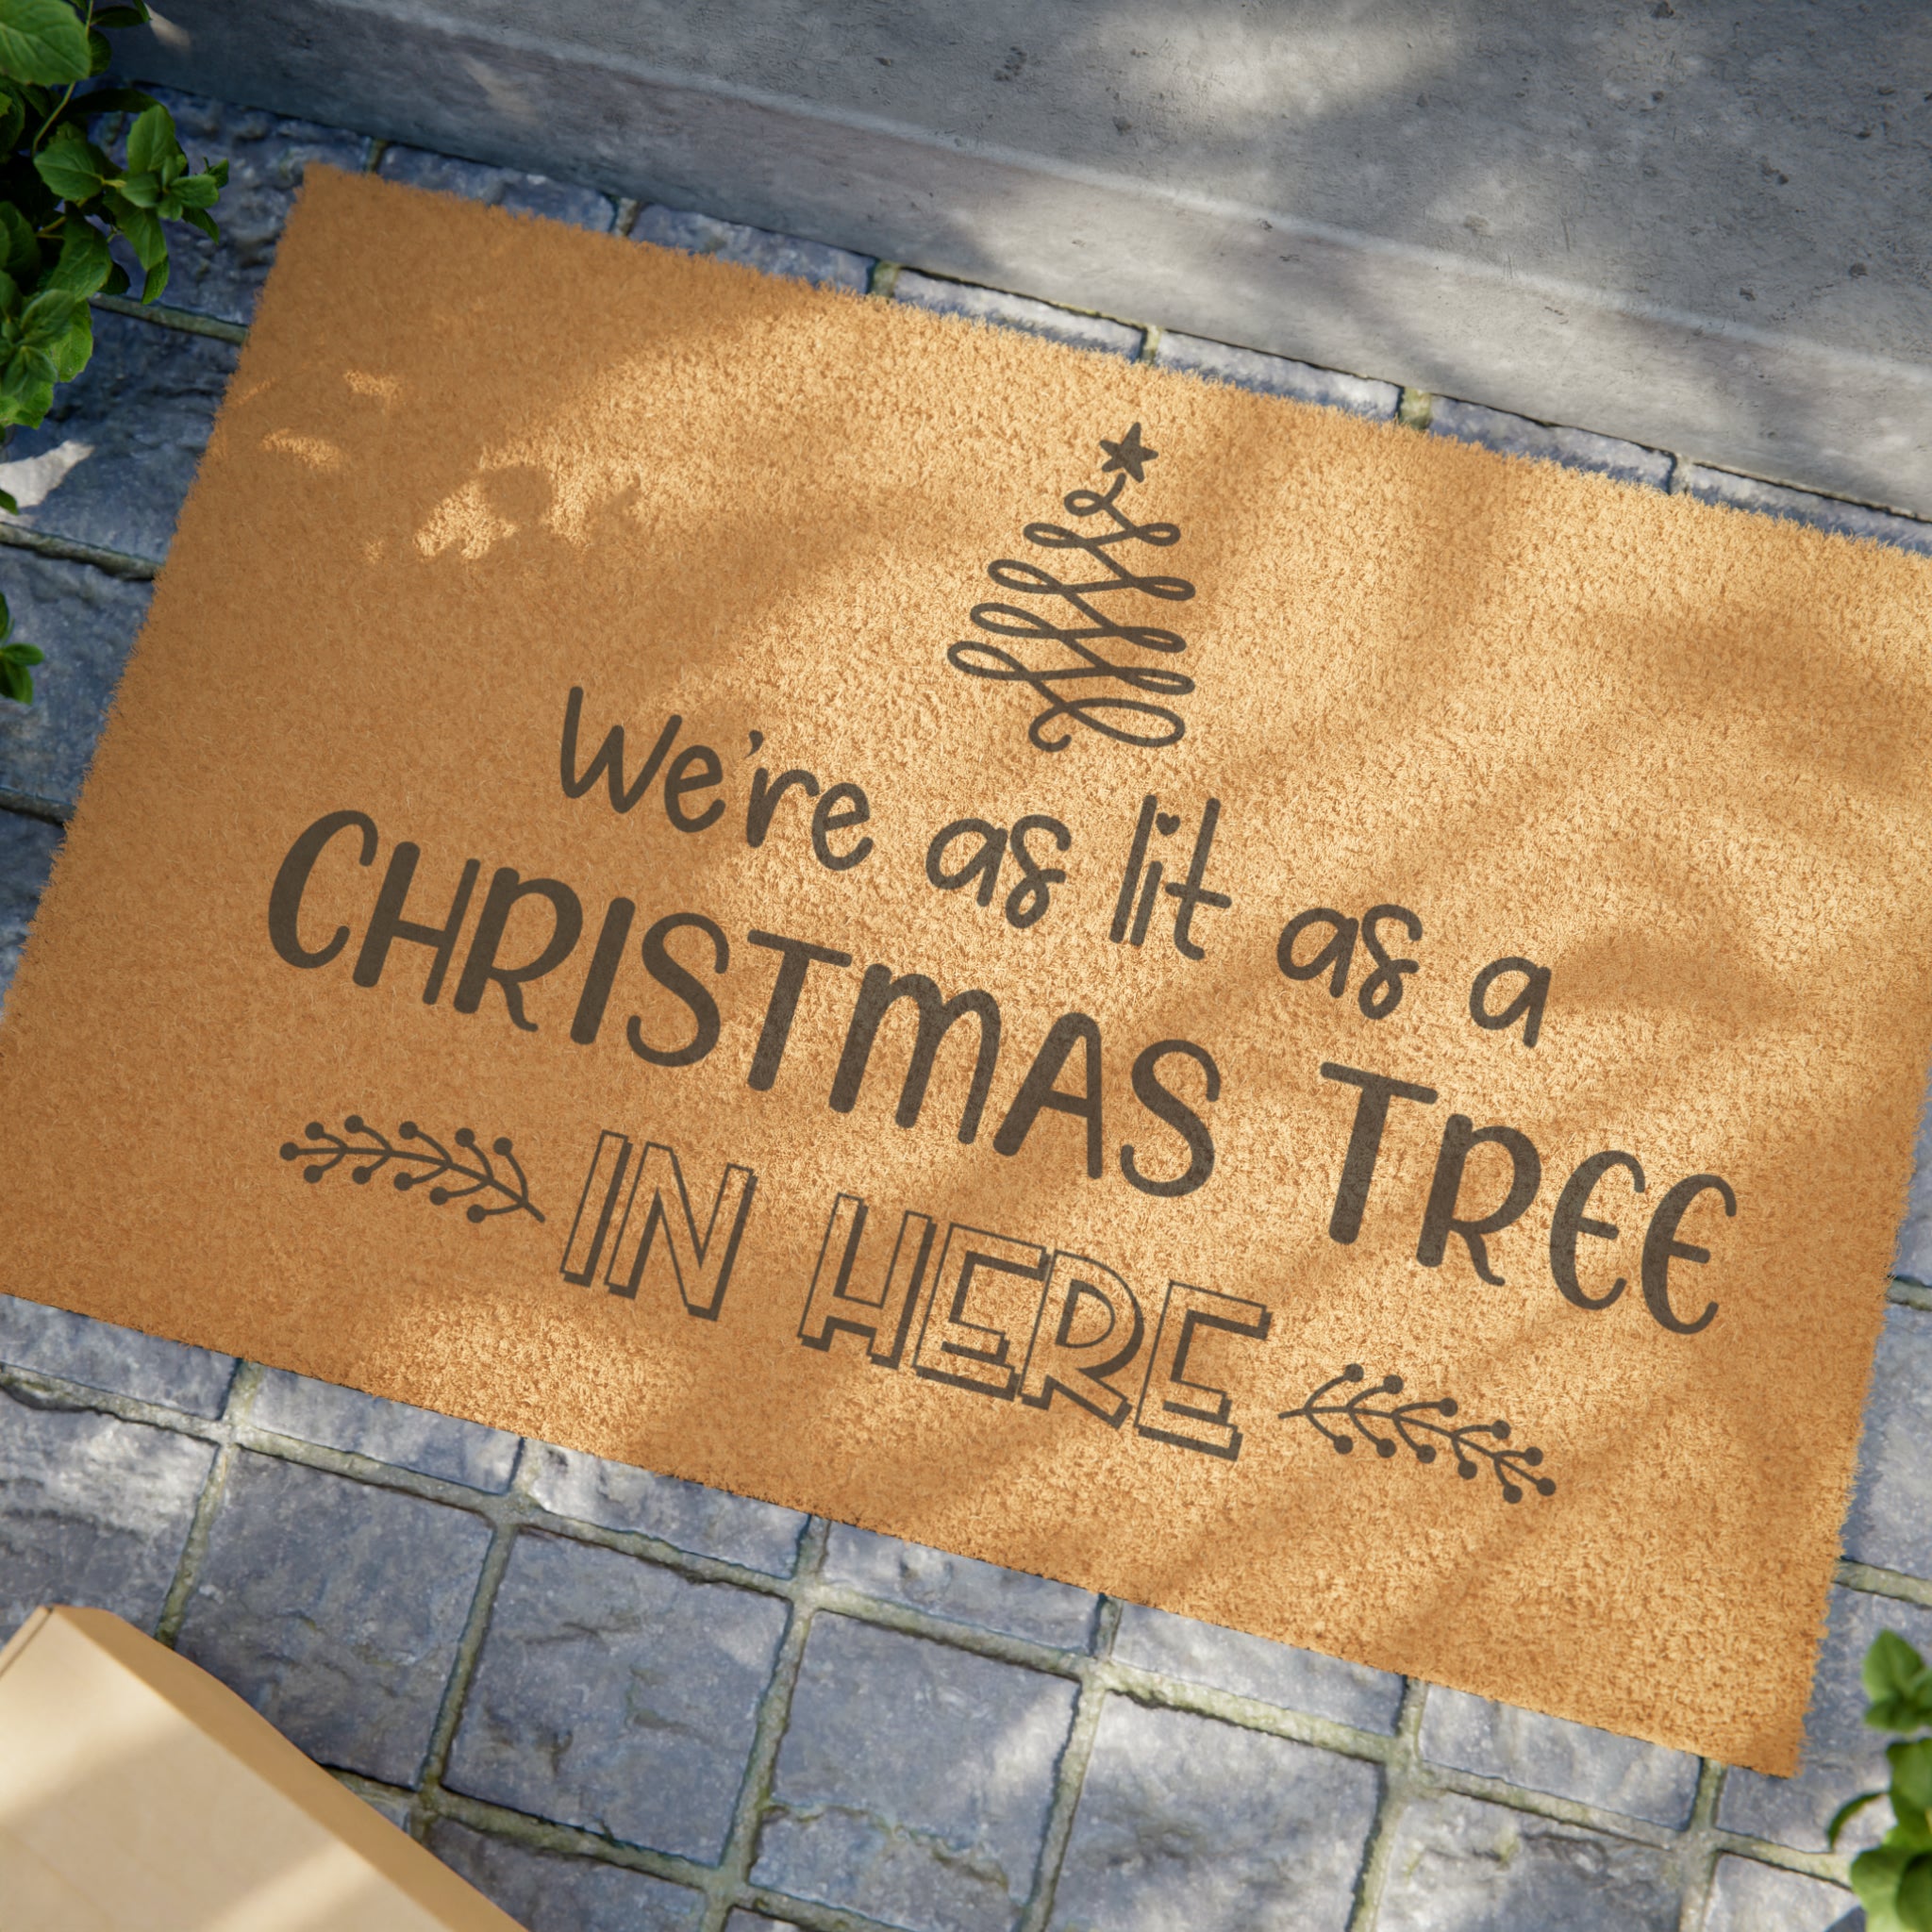 We're as lit as a Christmas Tree in here Doormat Funny Christmas Mat